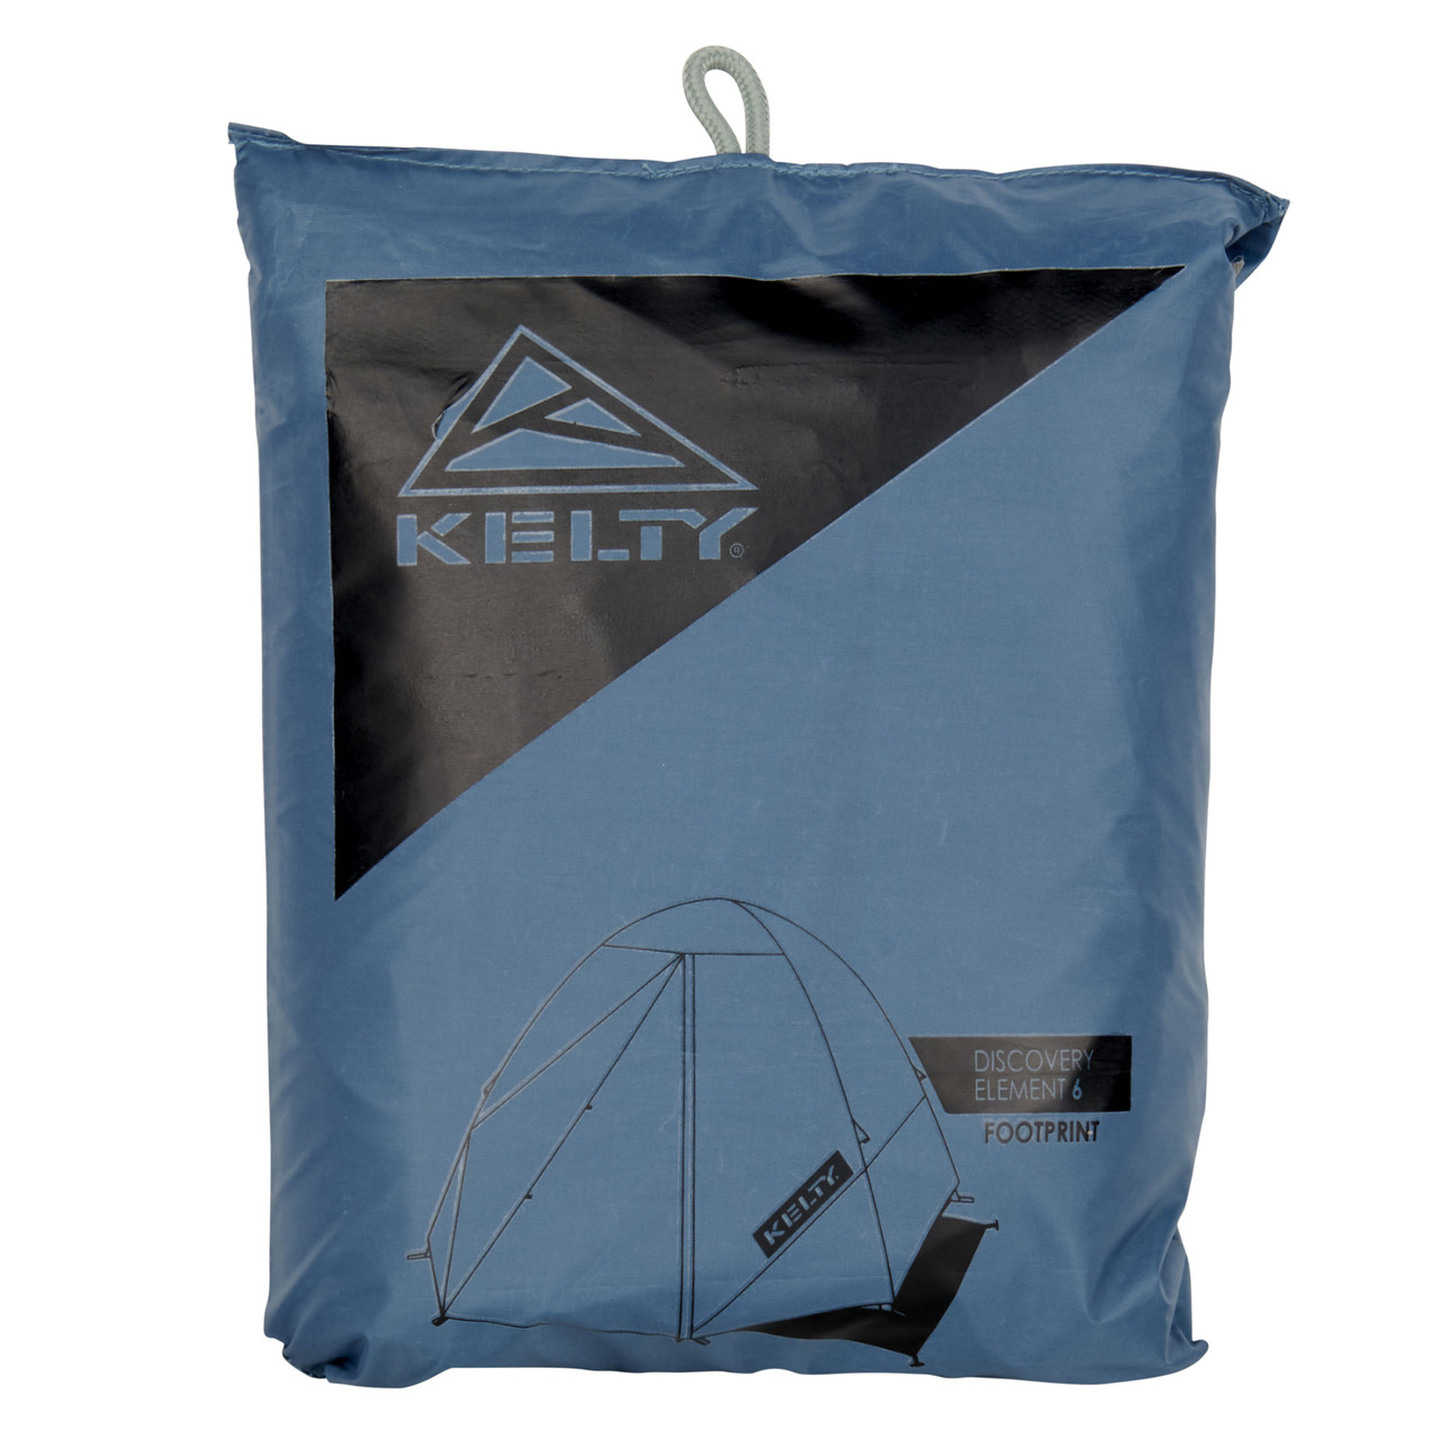 Kelty Discovery Element 6 Tent Footprint